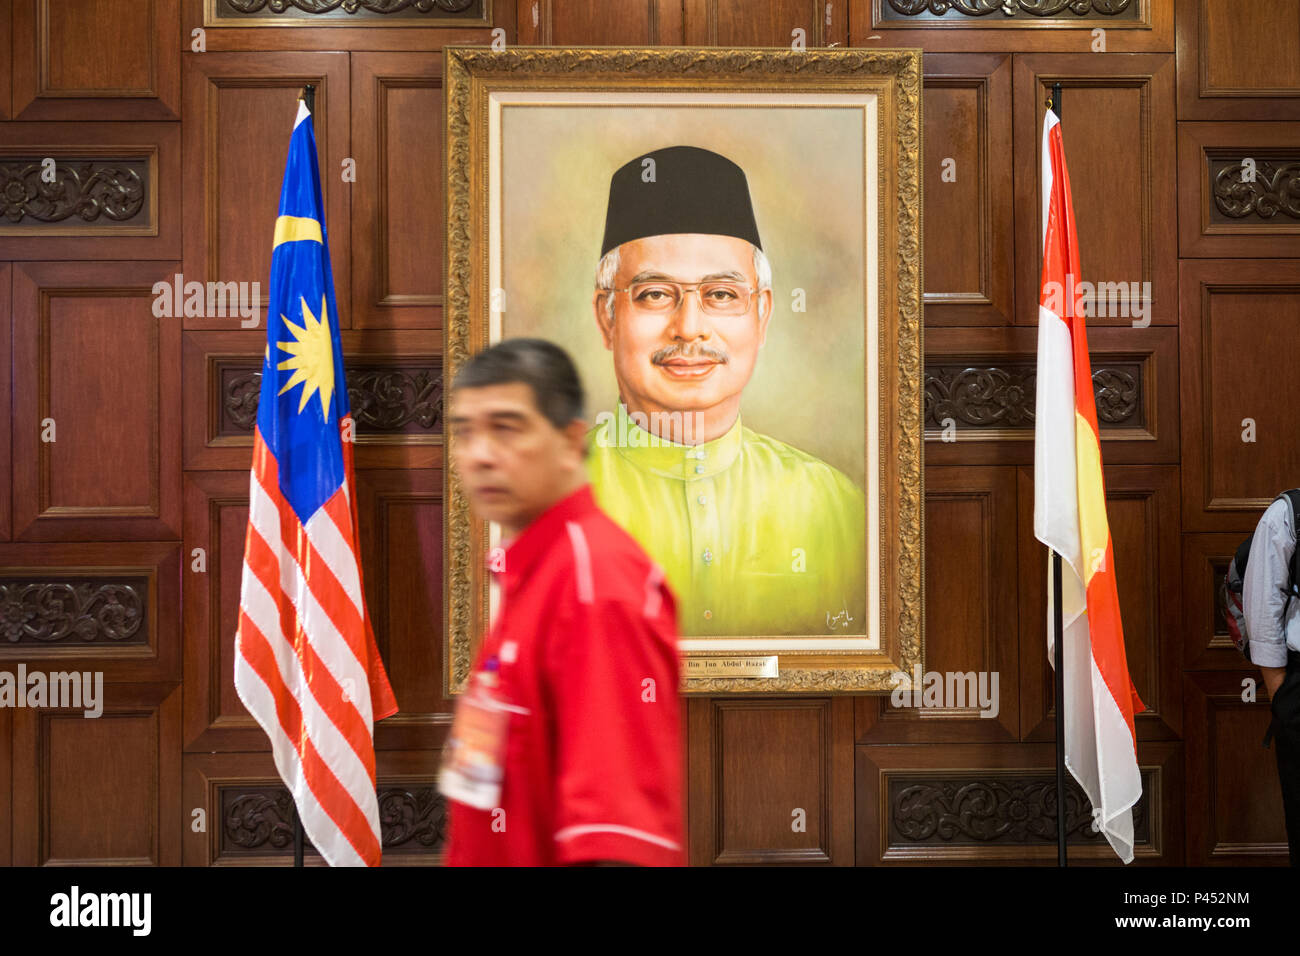 Man walks past a portrait of  Najib Razak, Malaysia's former Prime Minister, at the United Malays National Organisation (UMNO) headquarters at the Putra World Trade Center (PWTC) in Kuala Lumpur, Malaysia, on Tuesday, Dec. 8, 2015. Stock Photo